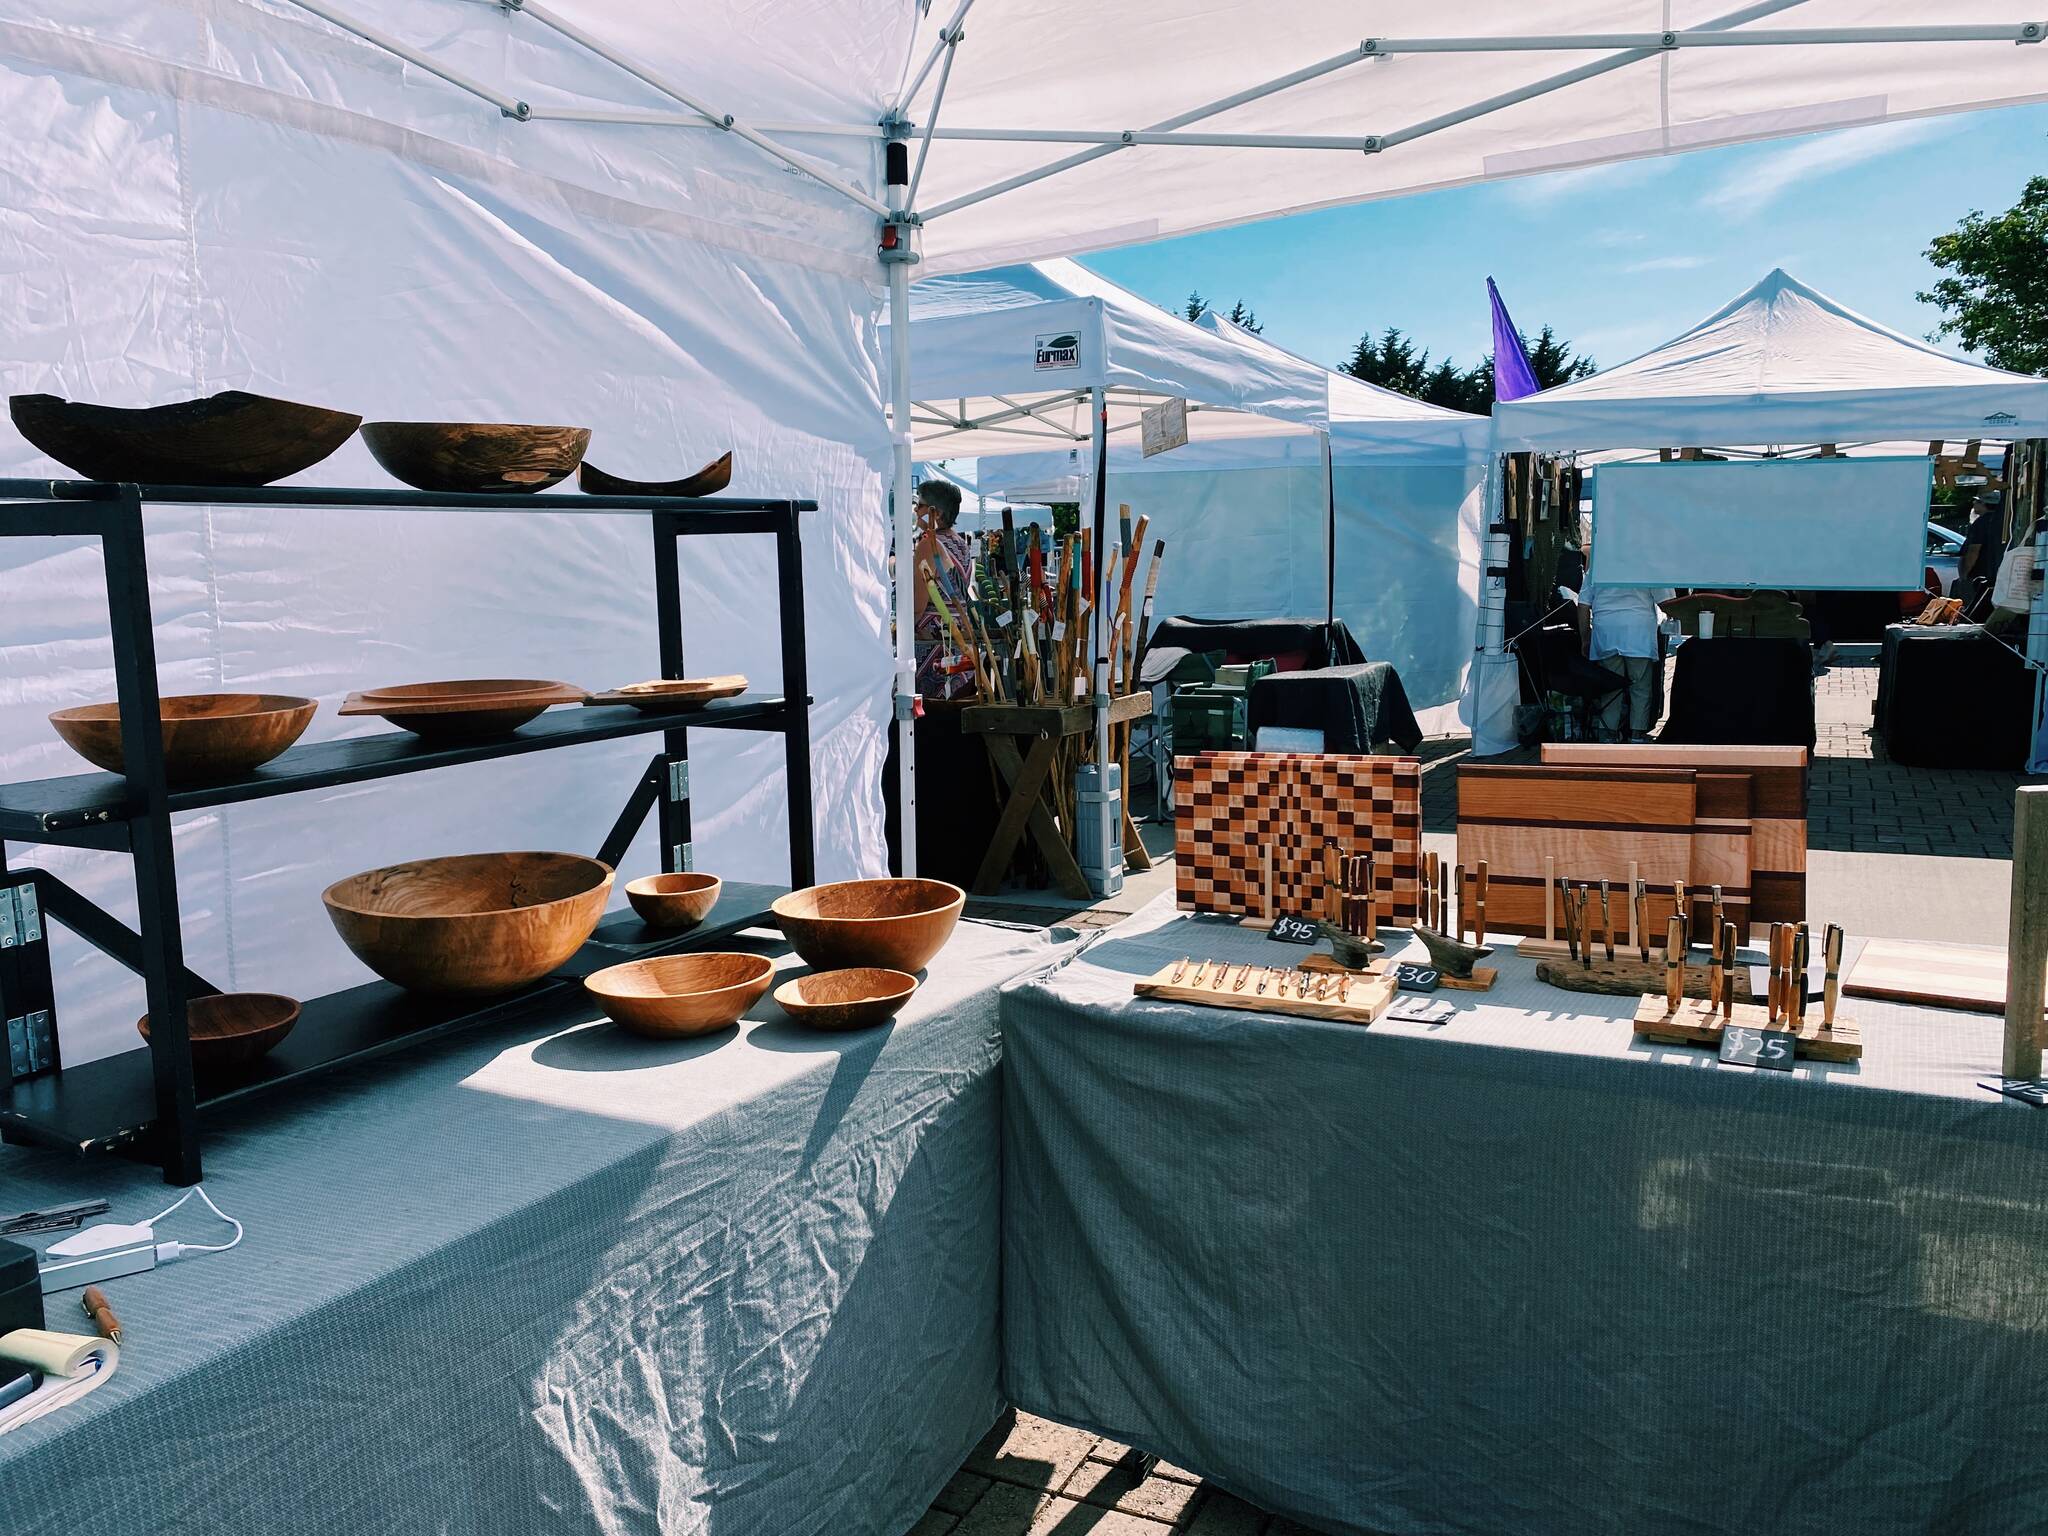 Woodenwares are on display at the Northwest Beach Works booth. Photo by Emma Jane Garcia